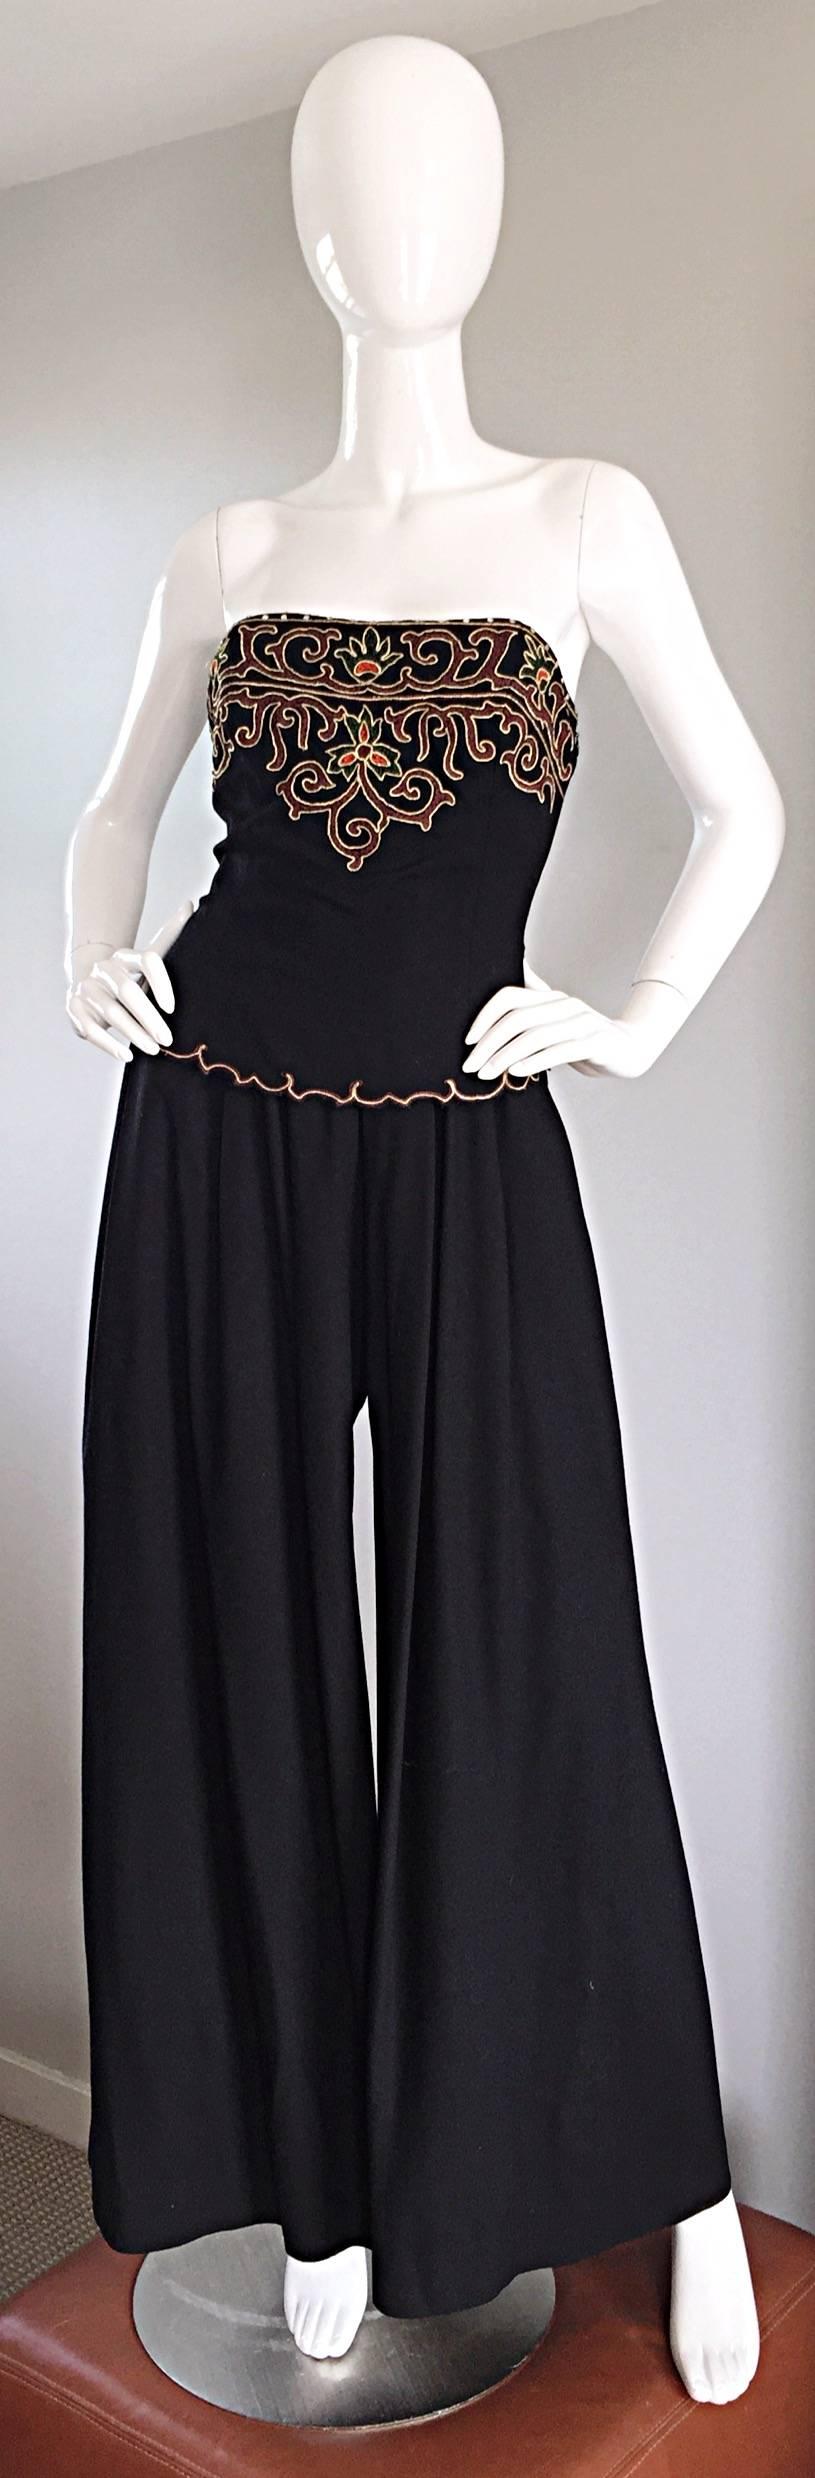 Exceptional, and super rare vintage PIERRE BALMAIN black strapless jumpsuit! Wonderful wide leg palazzos, that are so flattering, and uber chic! Regal hand embroidery at bodice, adorned with rhinestones at top edge. Bodice is also boned for